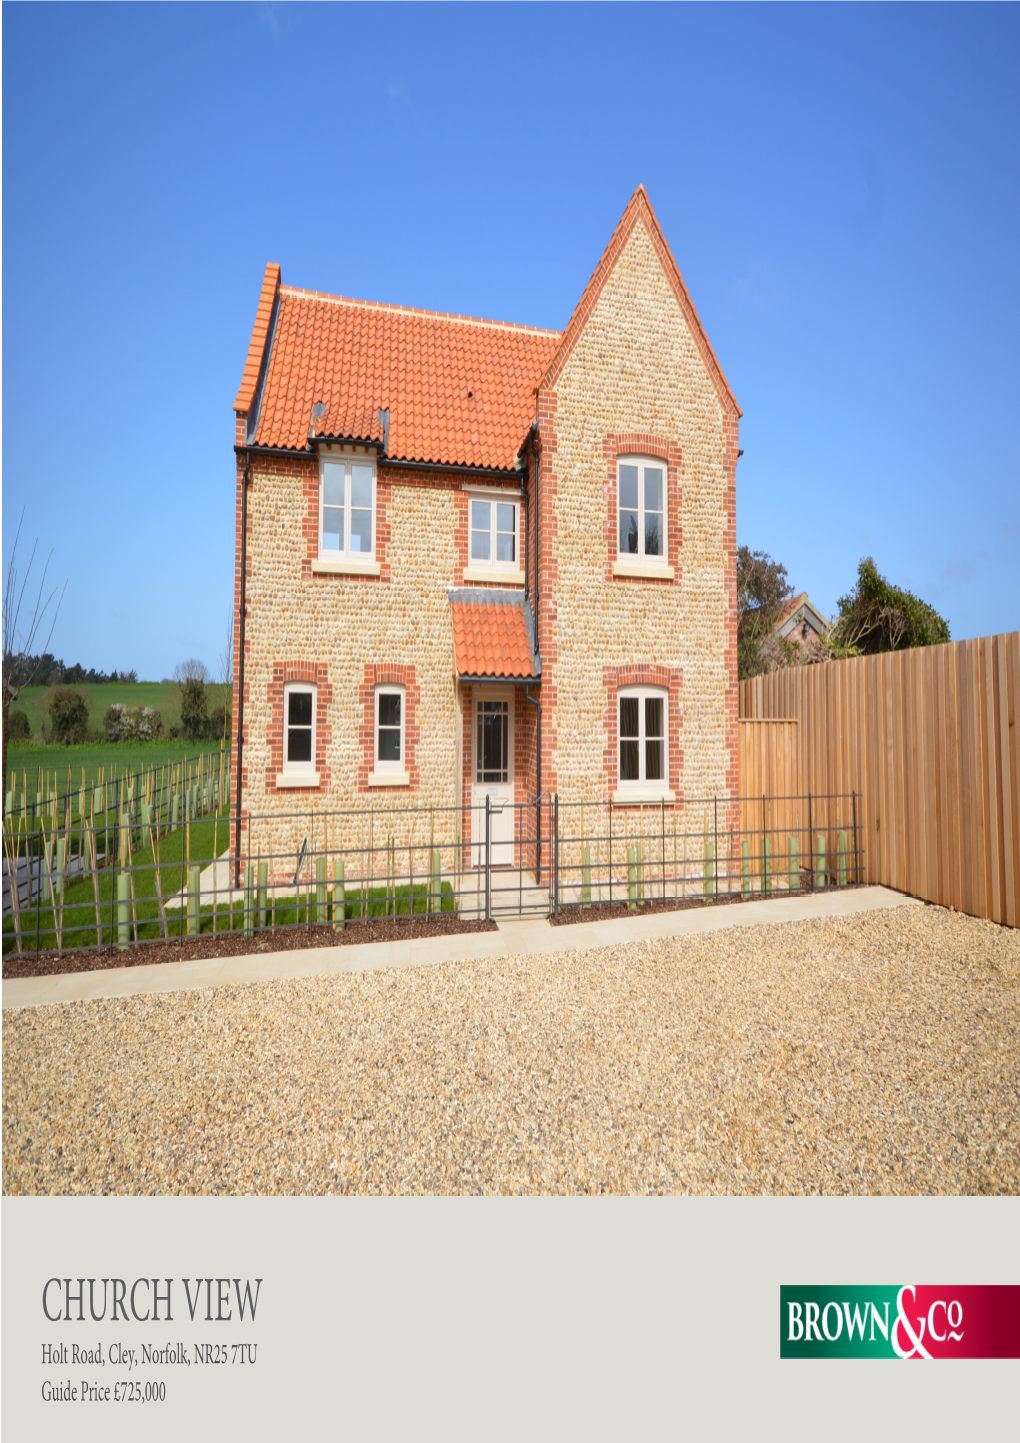 CHURCH VIEW Holt Road, Cley, Norfolk, NR25 7TU Guide Price £725,000